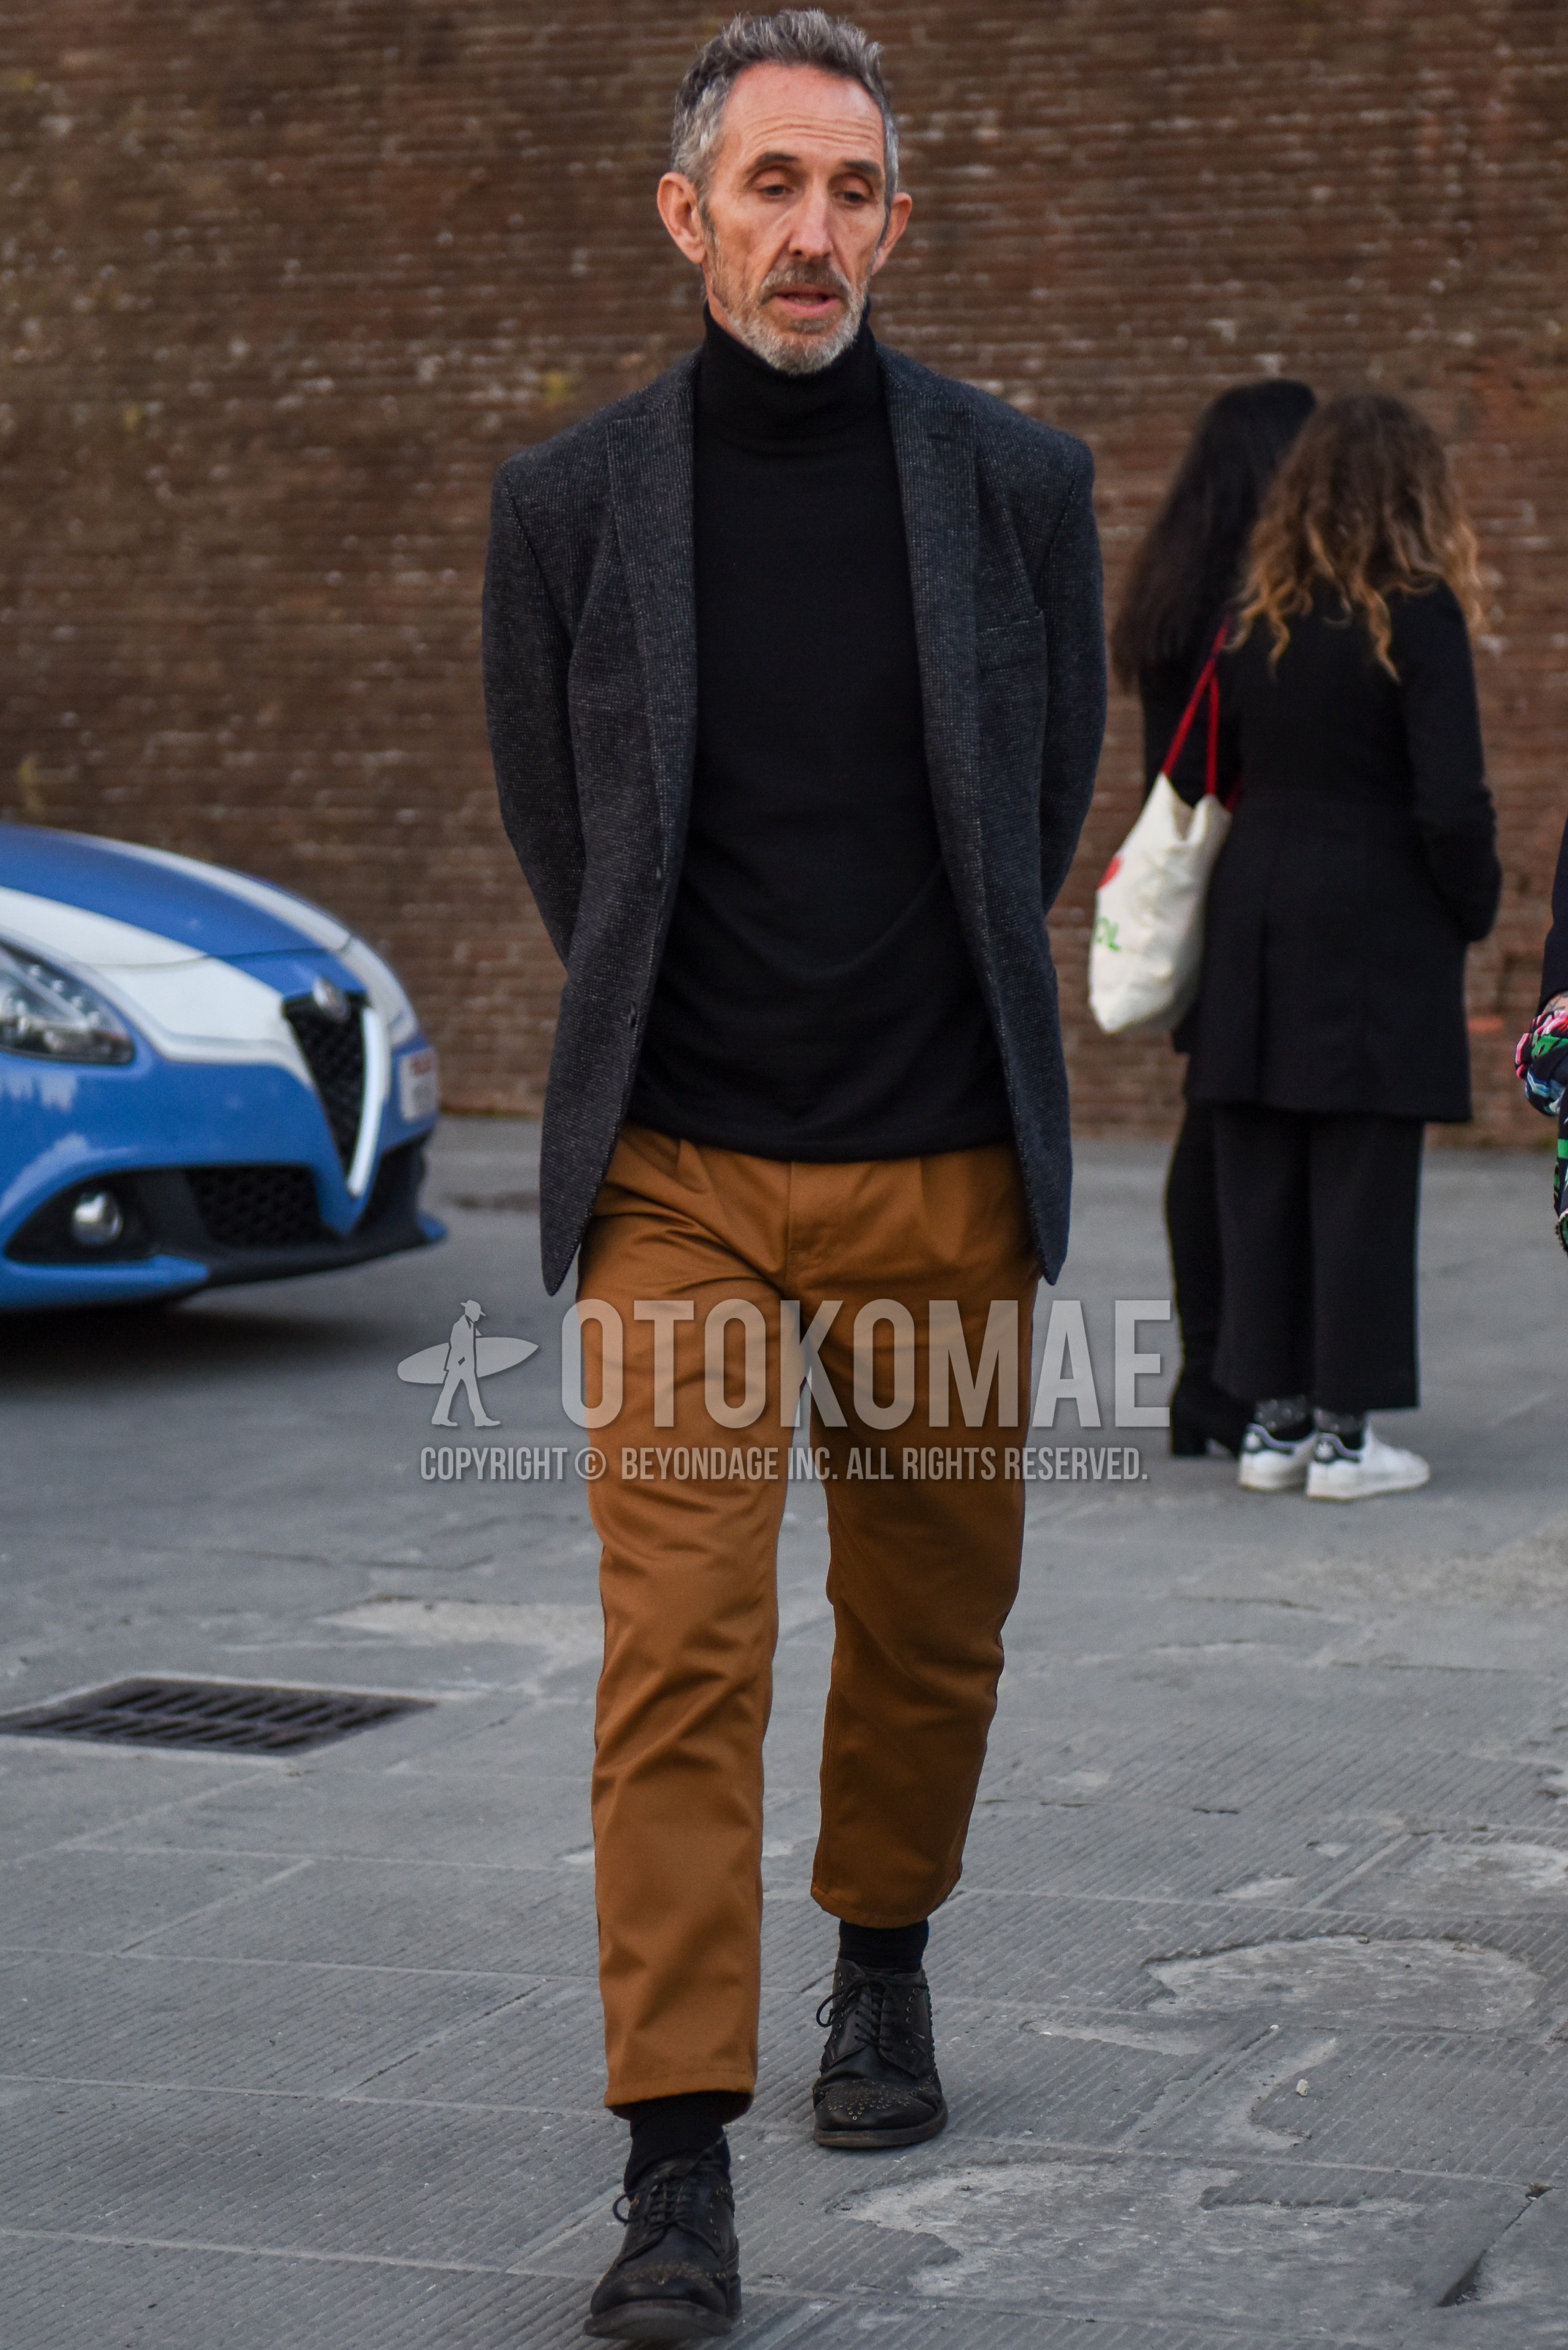 Men's spring autumn outfit with dark gray check tailored jacket, black plain turtleneck knit, beige plain chinos, beige plain ankle pants, black plain socks, black brogue shoes leather shoes.